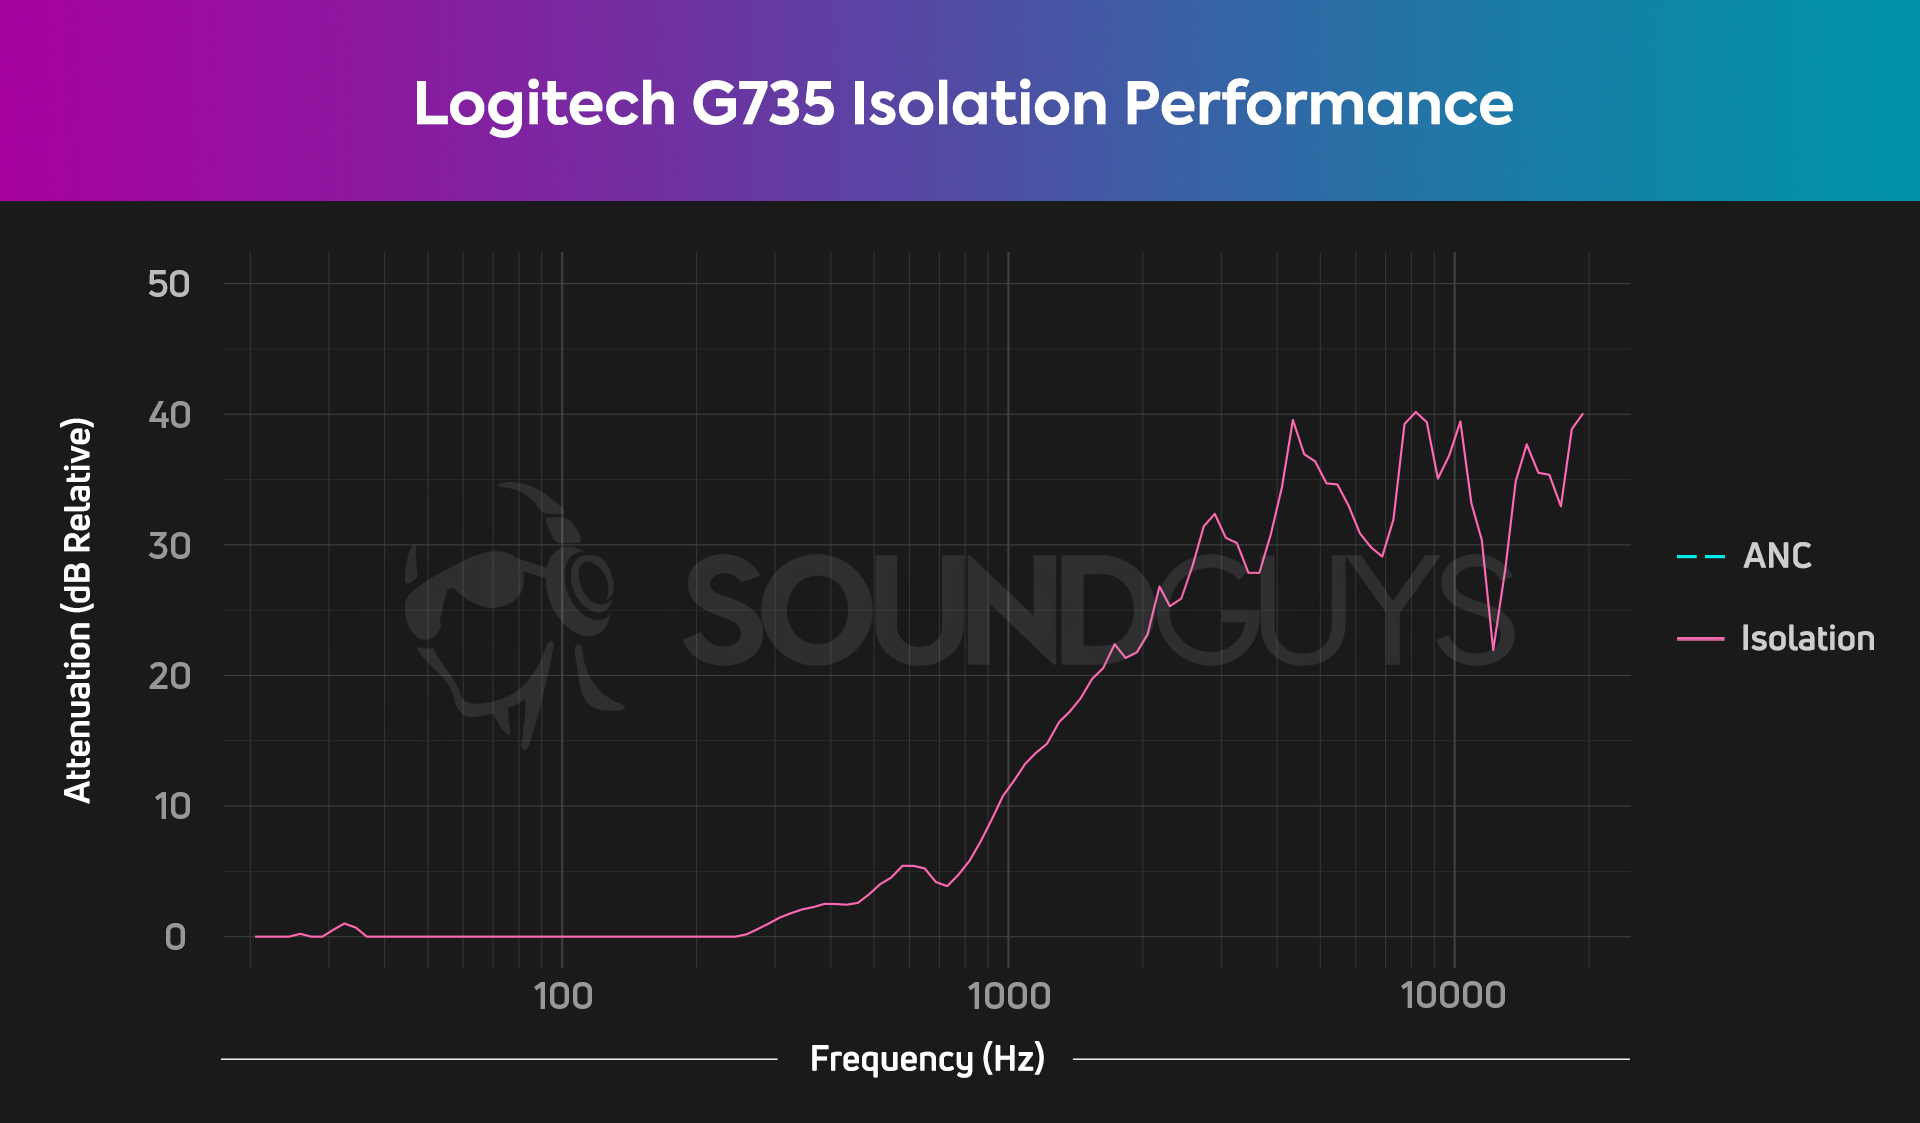 An isolation chart for the Logitech G735 which shows average attenuation performance